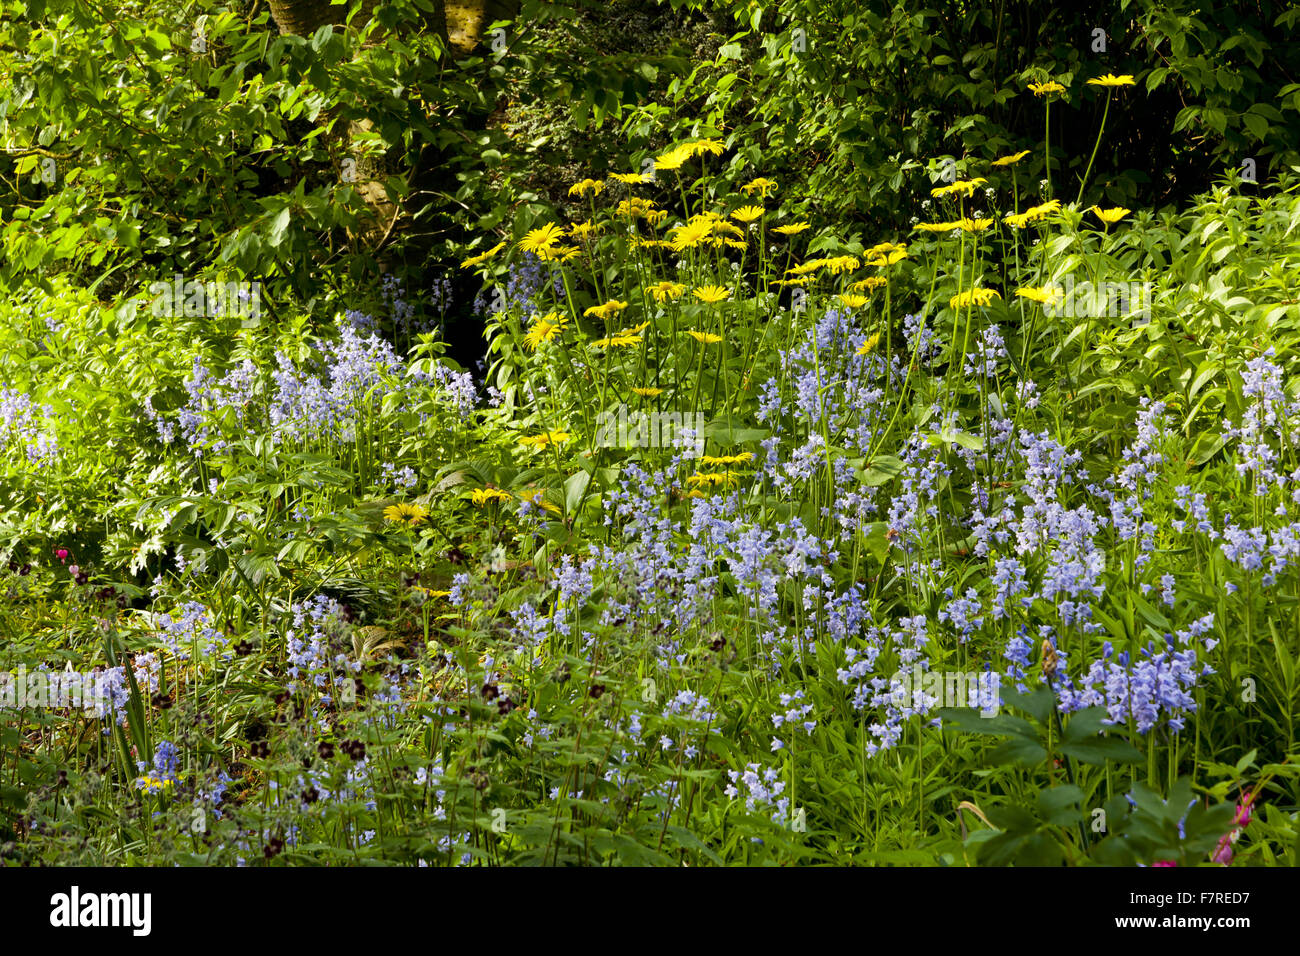 Bluebells and marigolds in the garden at Eyam Hall and Craft Centre, Derbyshire. Eyam Hall is an unspoilt example of a gritstone Jacobean manor house, set within a walled garden. Stock Photo